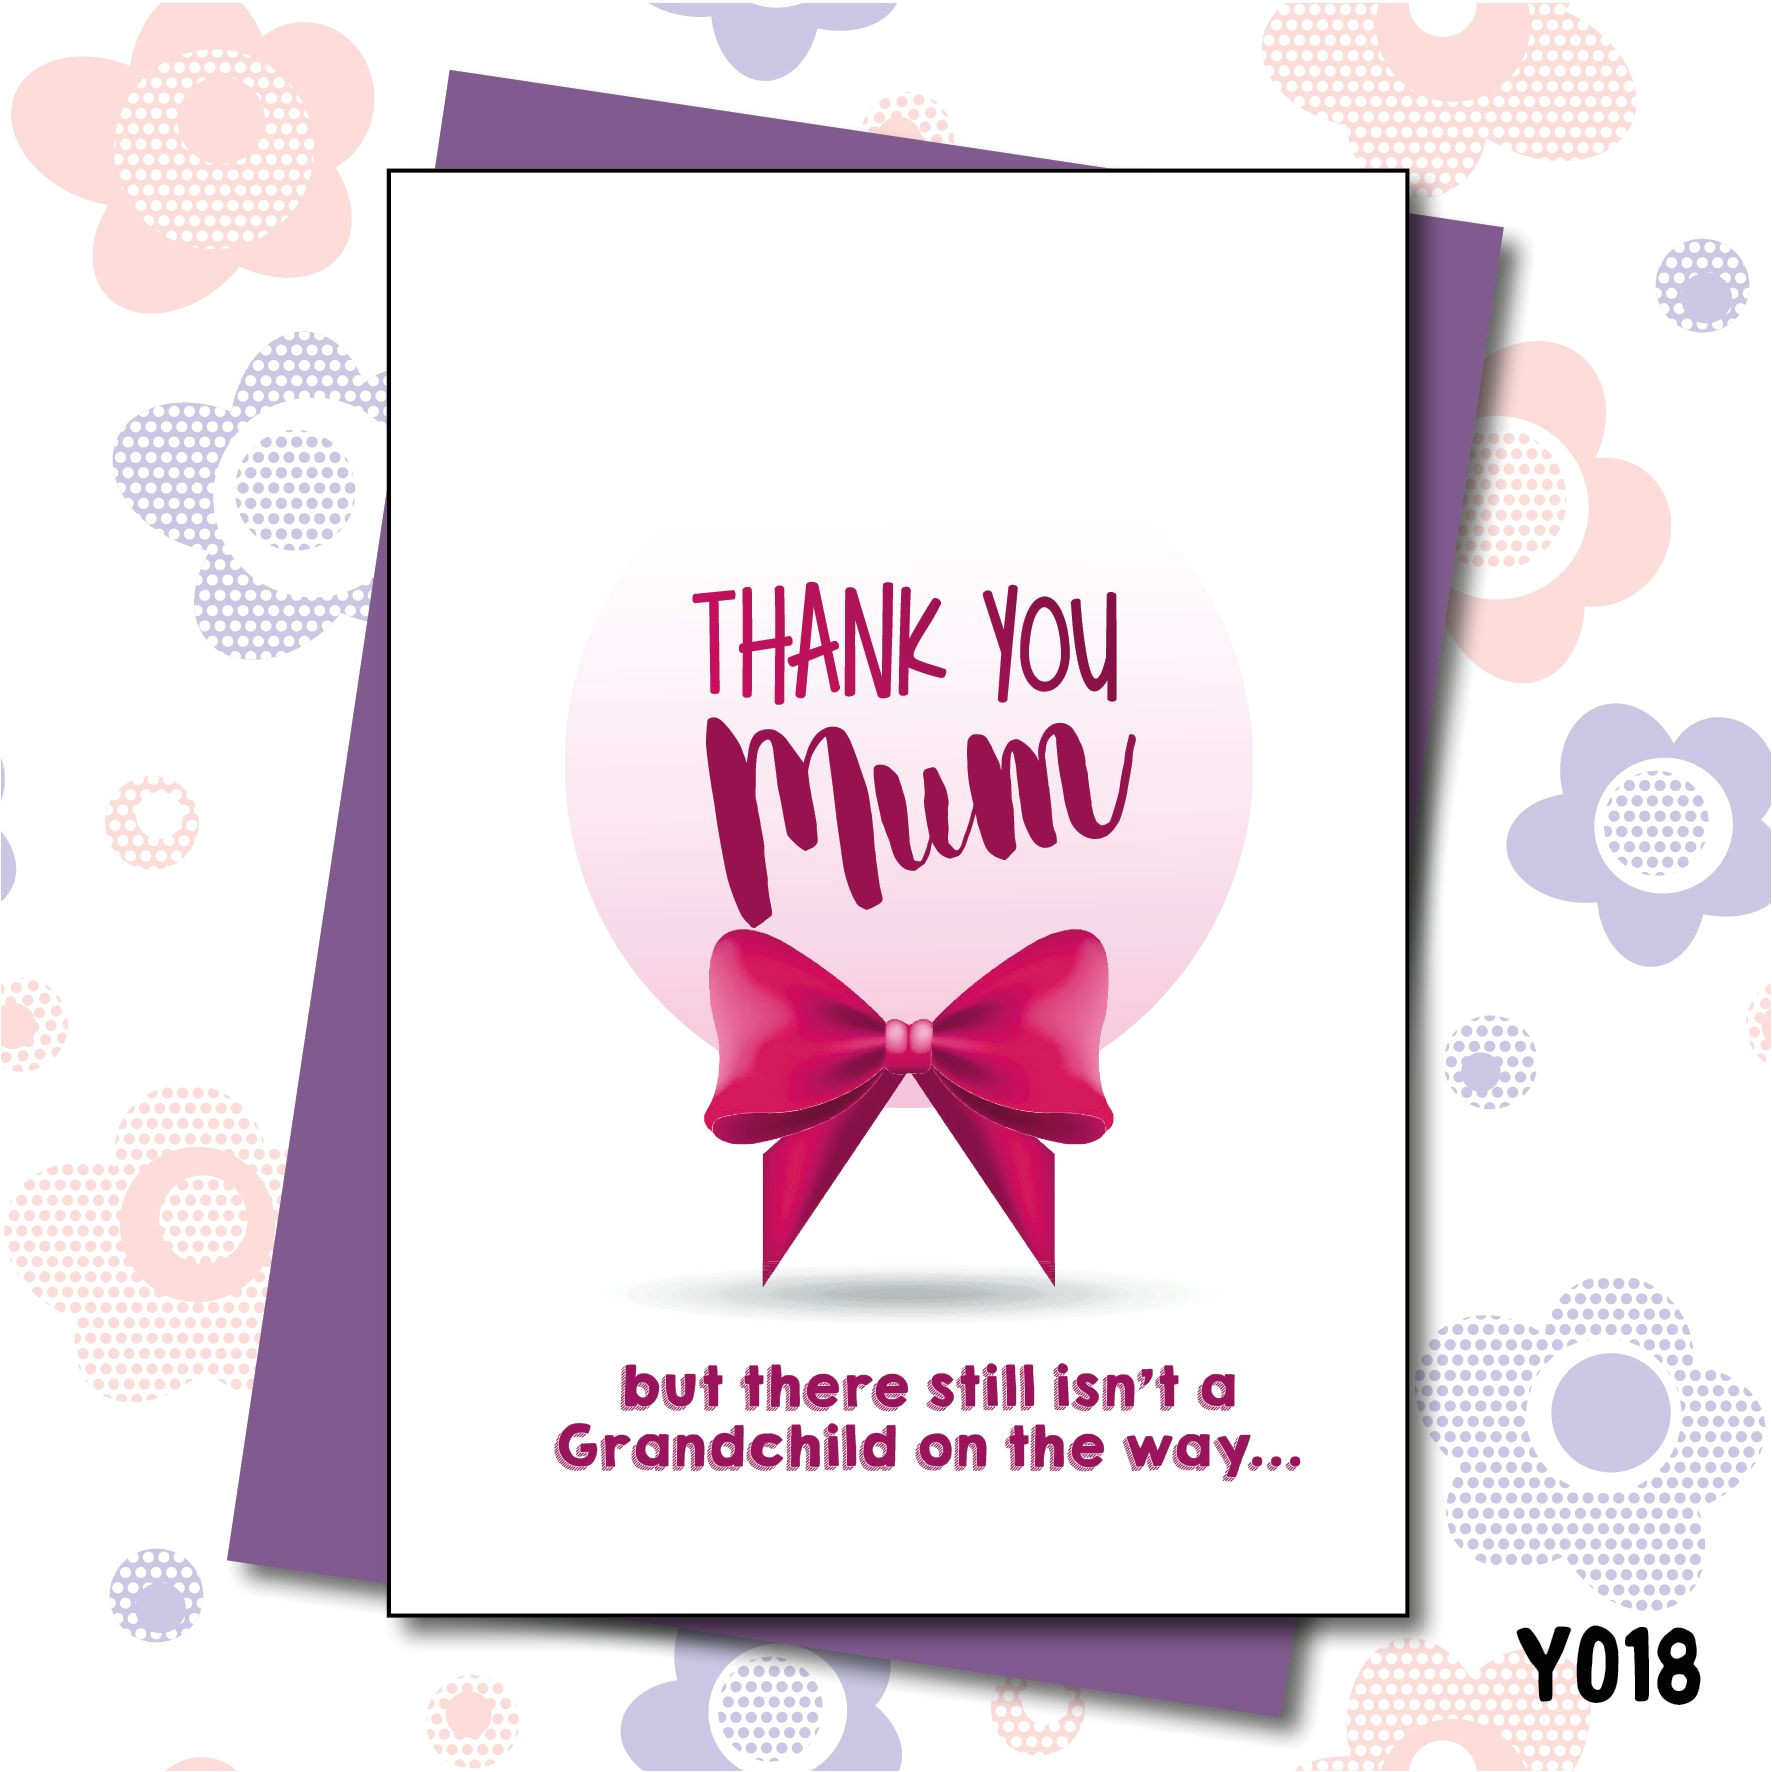 Thank You Card for Your Grandparents Pin On Humour